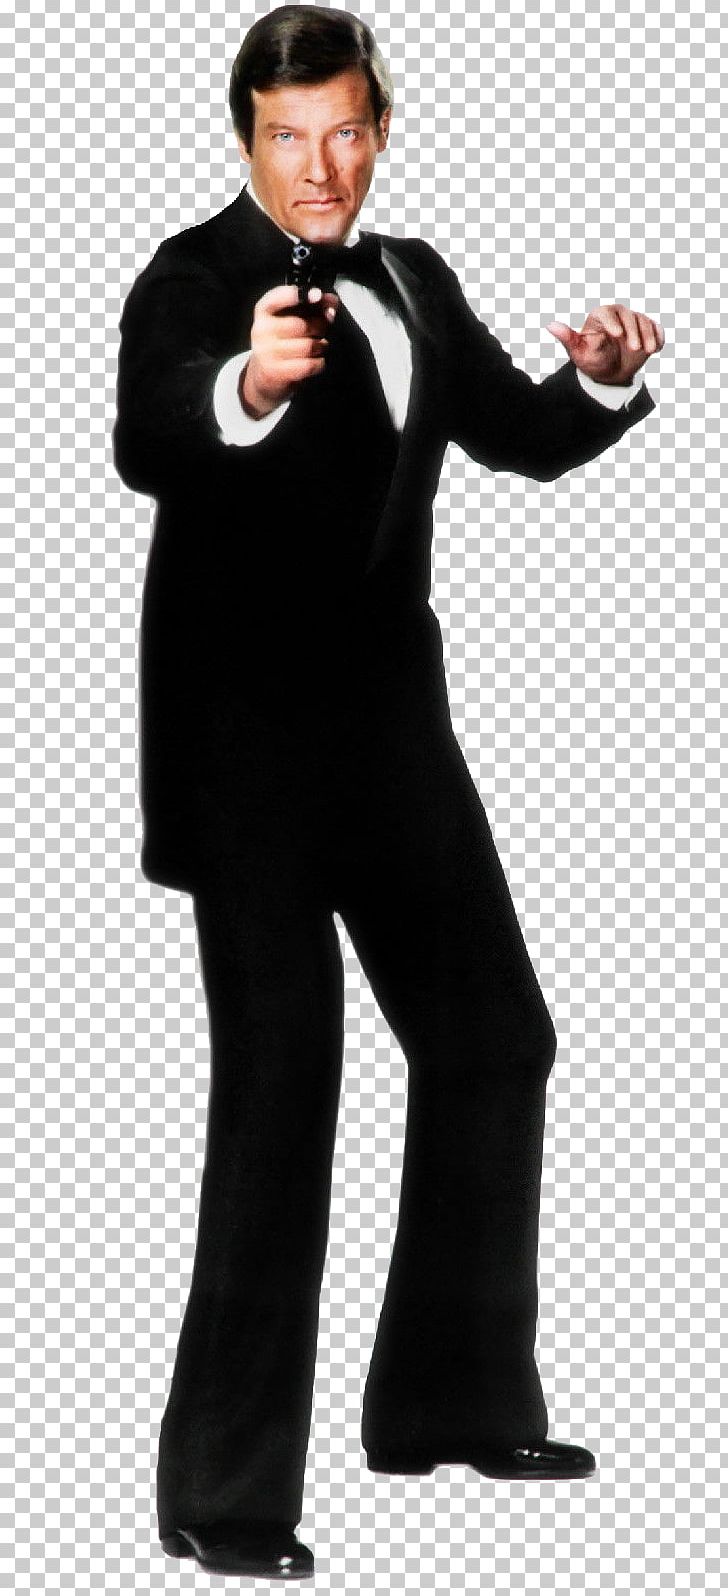 Roger Moore James Bond A View To A Kill Oddjob Standee PNG, Clipart, Actor, Bond Girl, Britt Ekland, Businessperson, Costume Free PNG Download